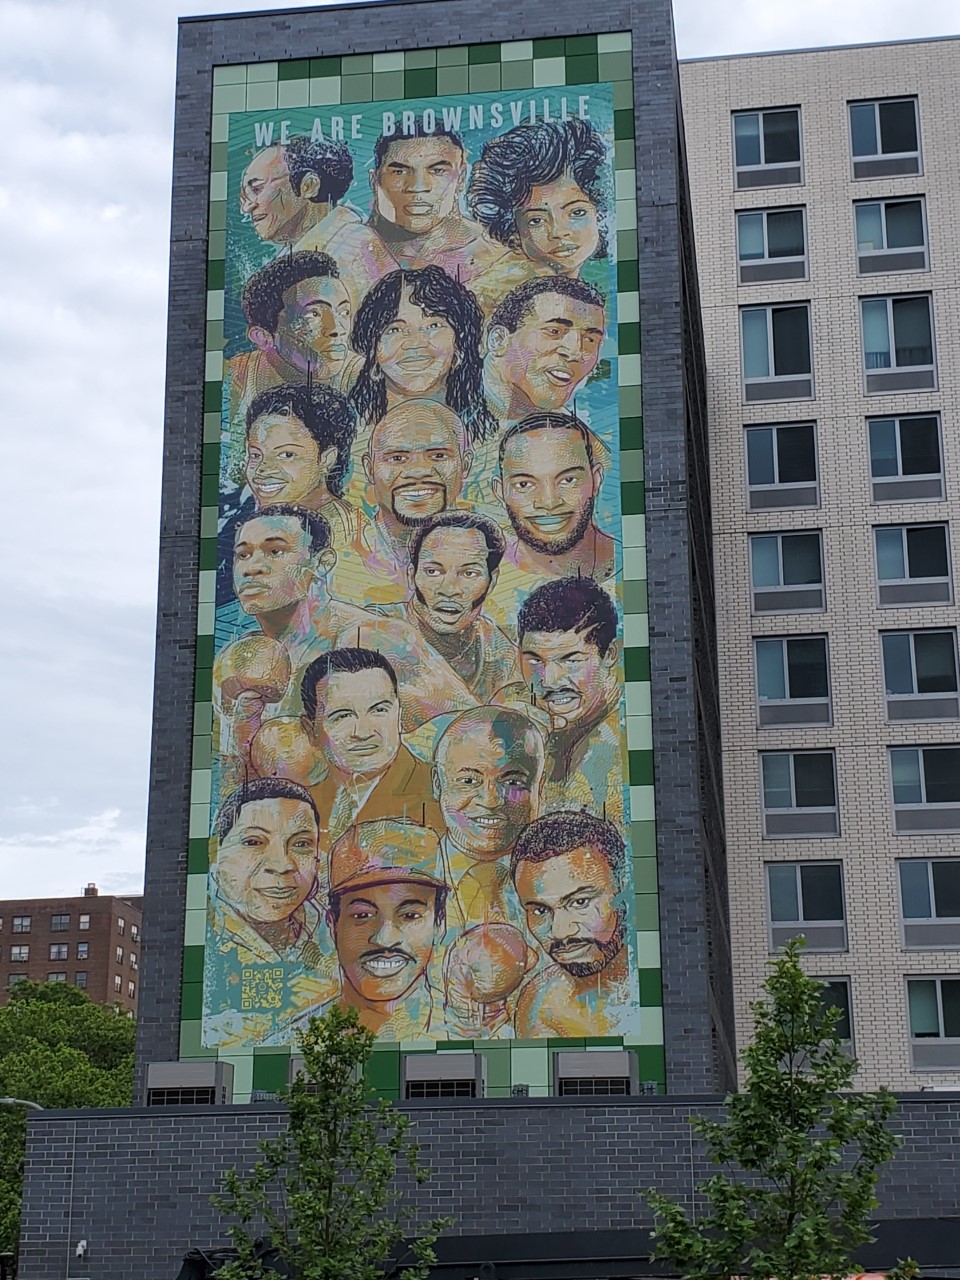 The “We Are Brownsville” mural, created by artist William “GoodWill” Ellis, celebrates 17 renowned individuals with roots in the community.